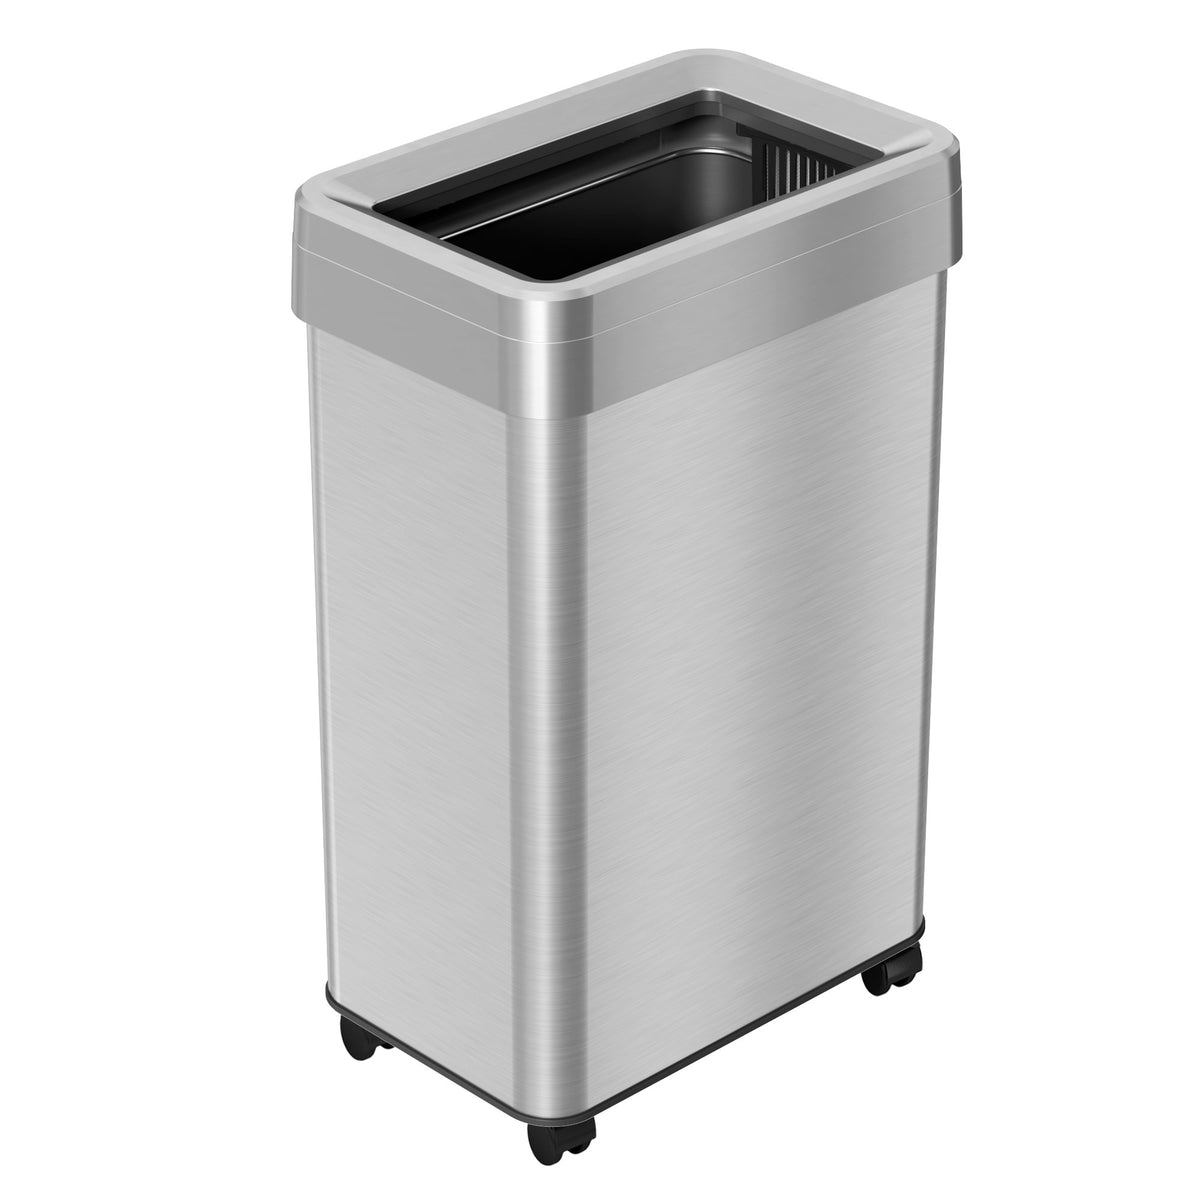 16 Gallon / 60 Liter Rectangular Open Top Trash Can with Wheels